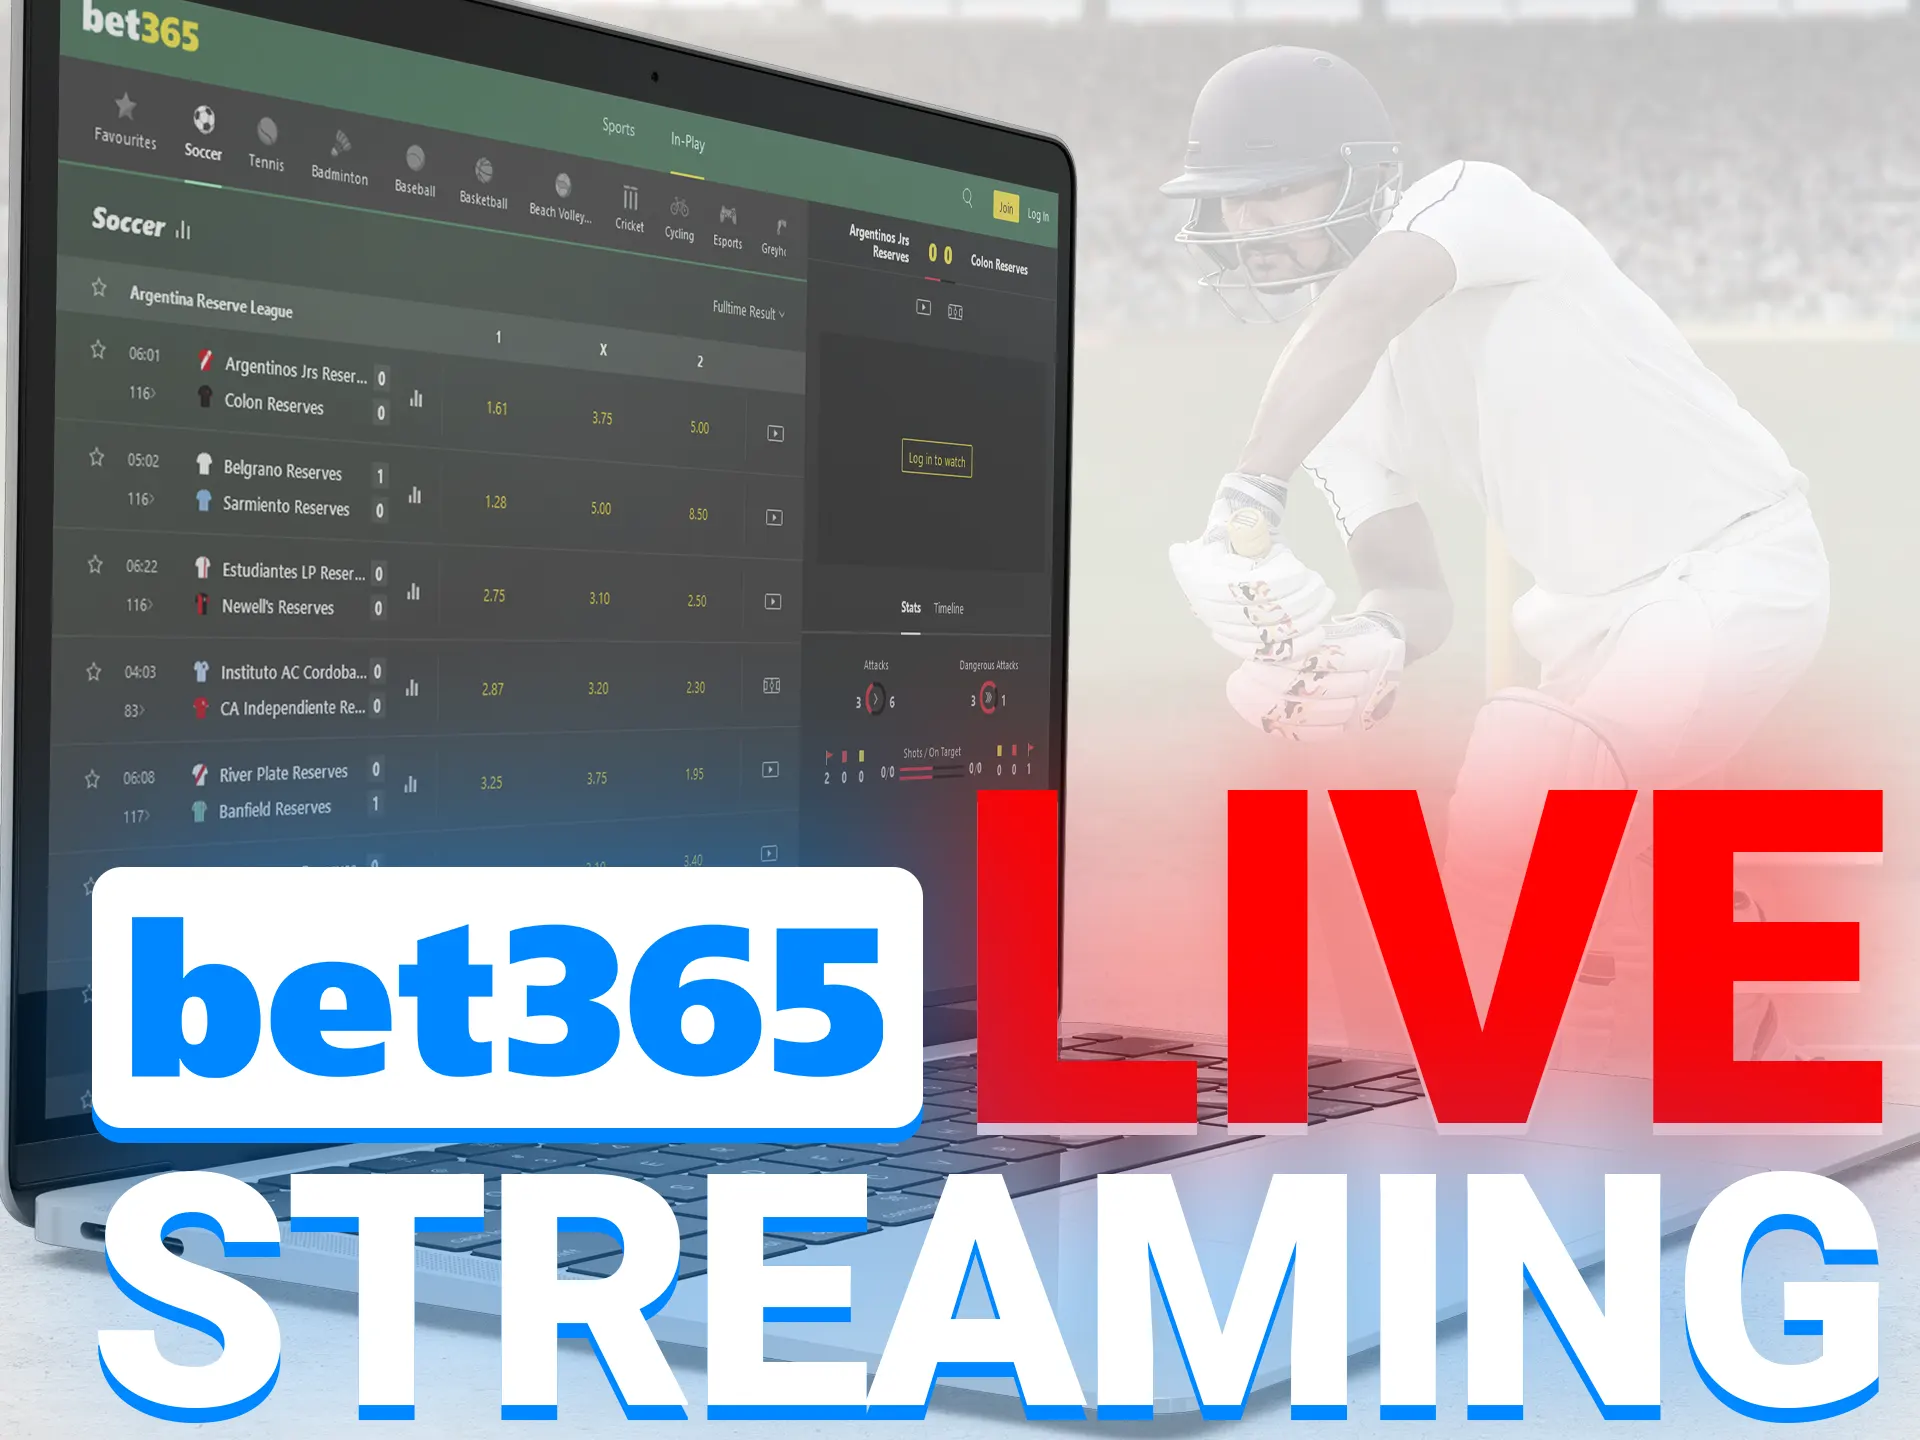 Bet365 offers a live streaming feature that covers all major cricket tournaments.